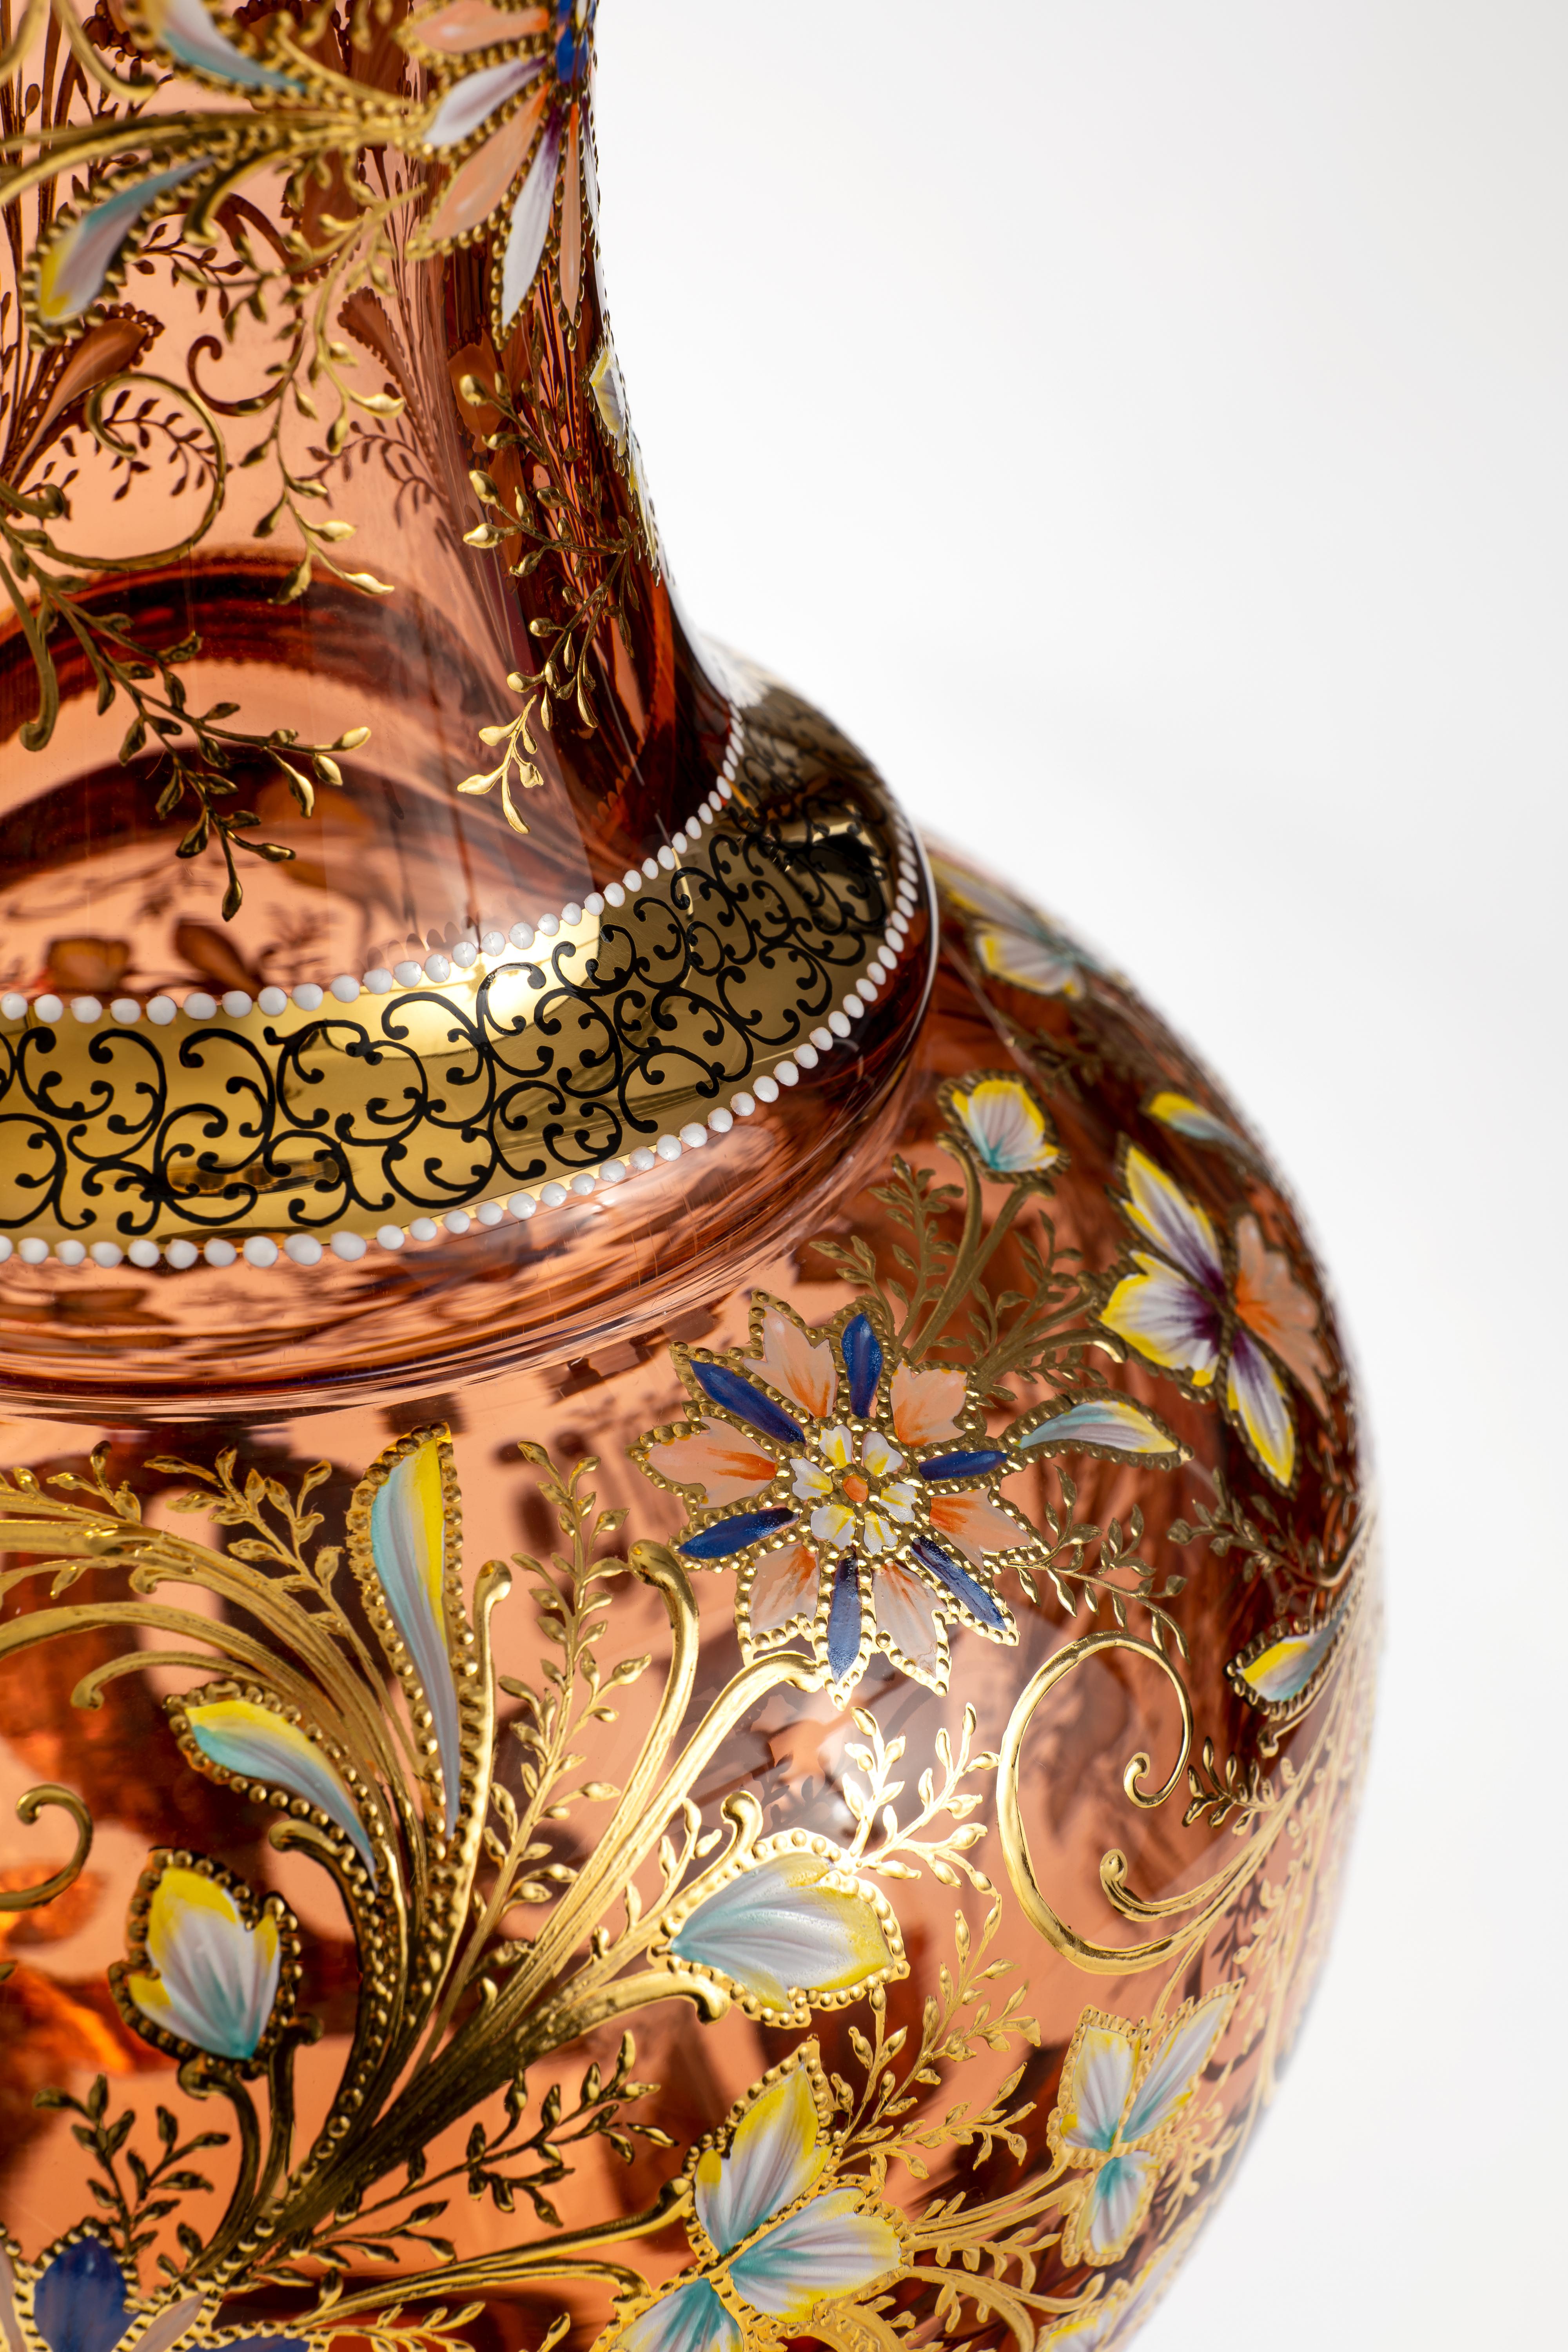 The elegant hand painted and gilded vase is another masterpiece by painter Jan Janecký.
“I learn from the old masters. I study their works and try to follow the same procedures
as over a century ago,” he says of his passion. “crystal glass